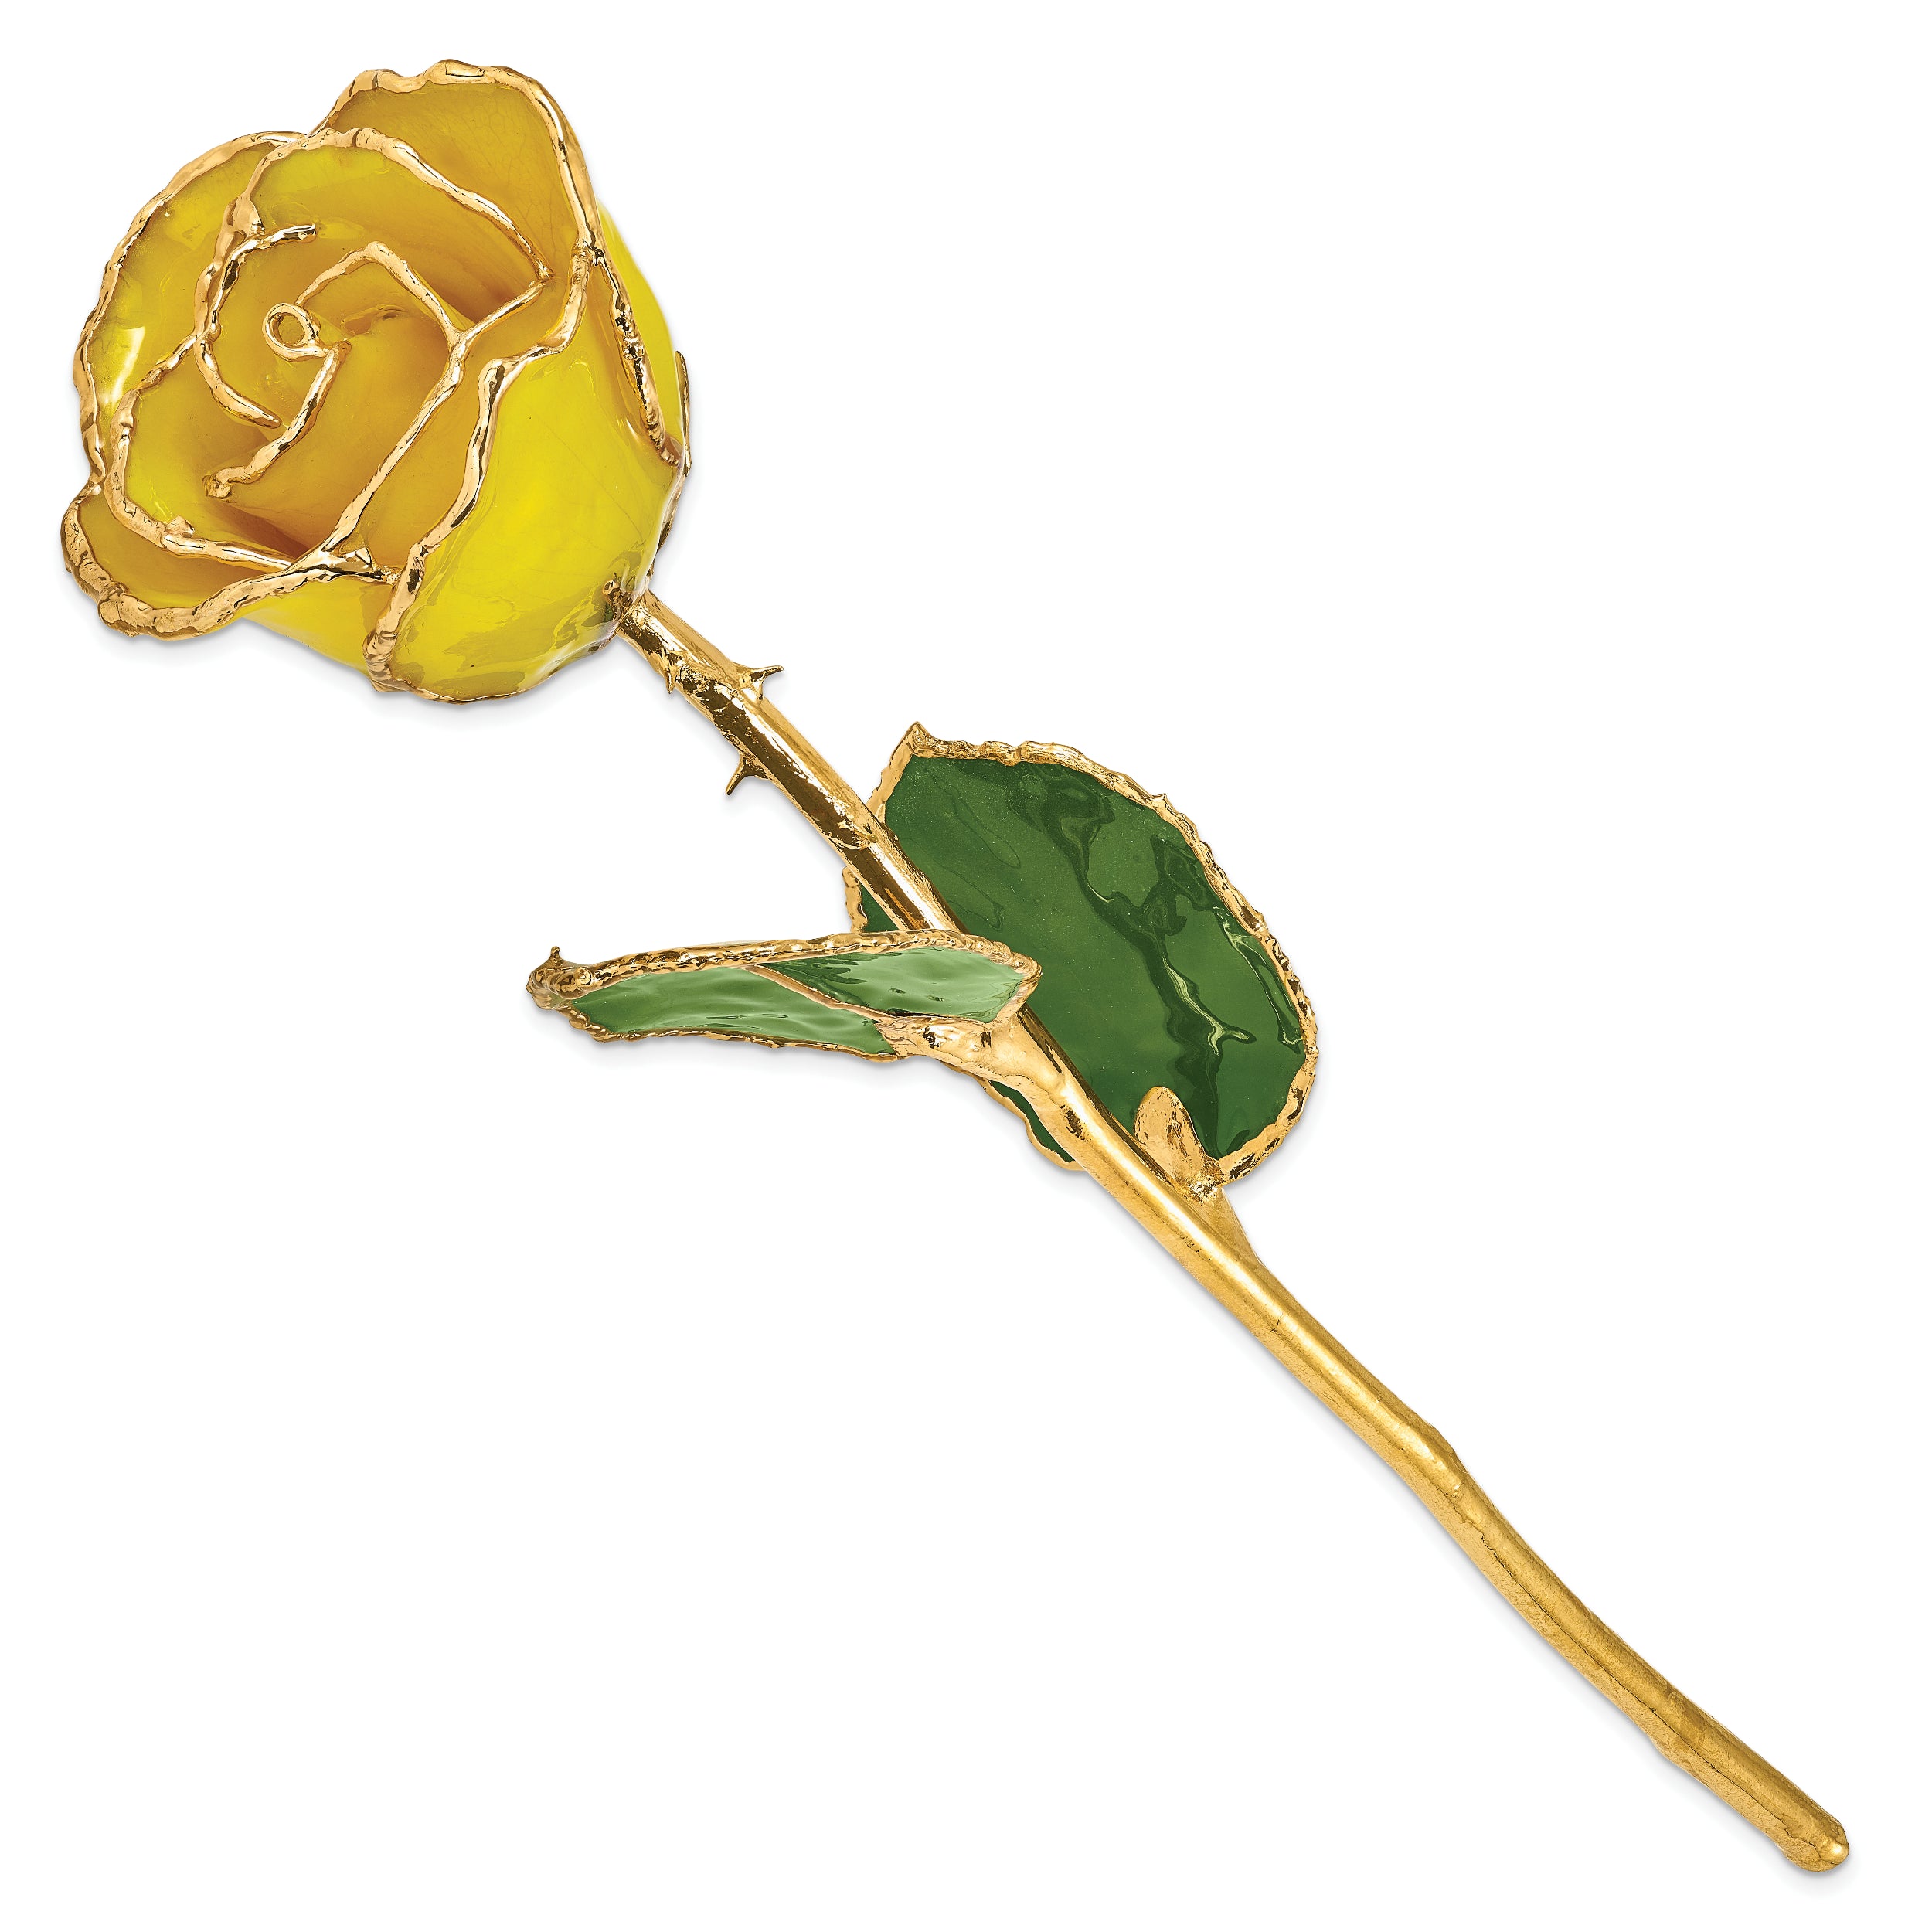 Lacquer Dipped Gold Trim Yellow Rose